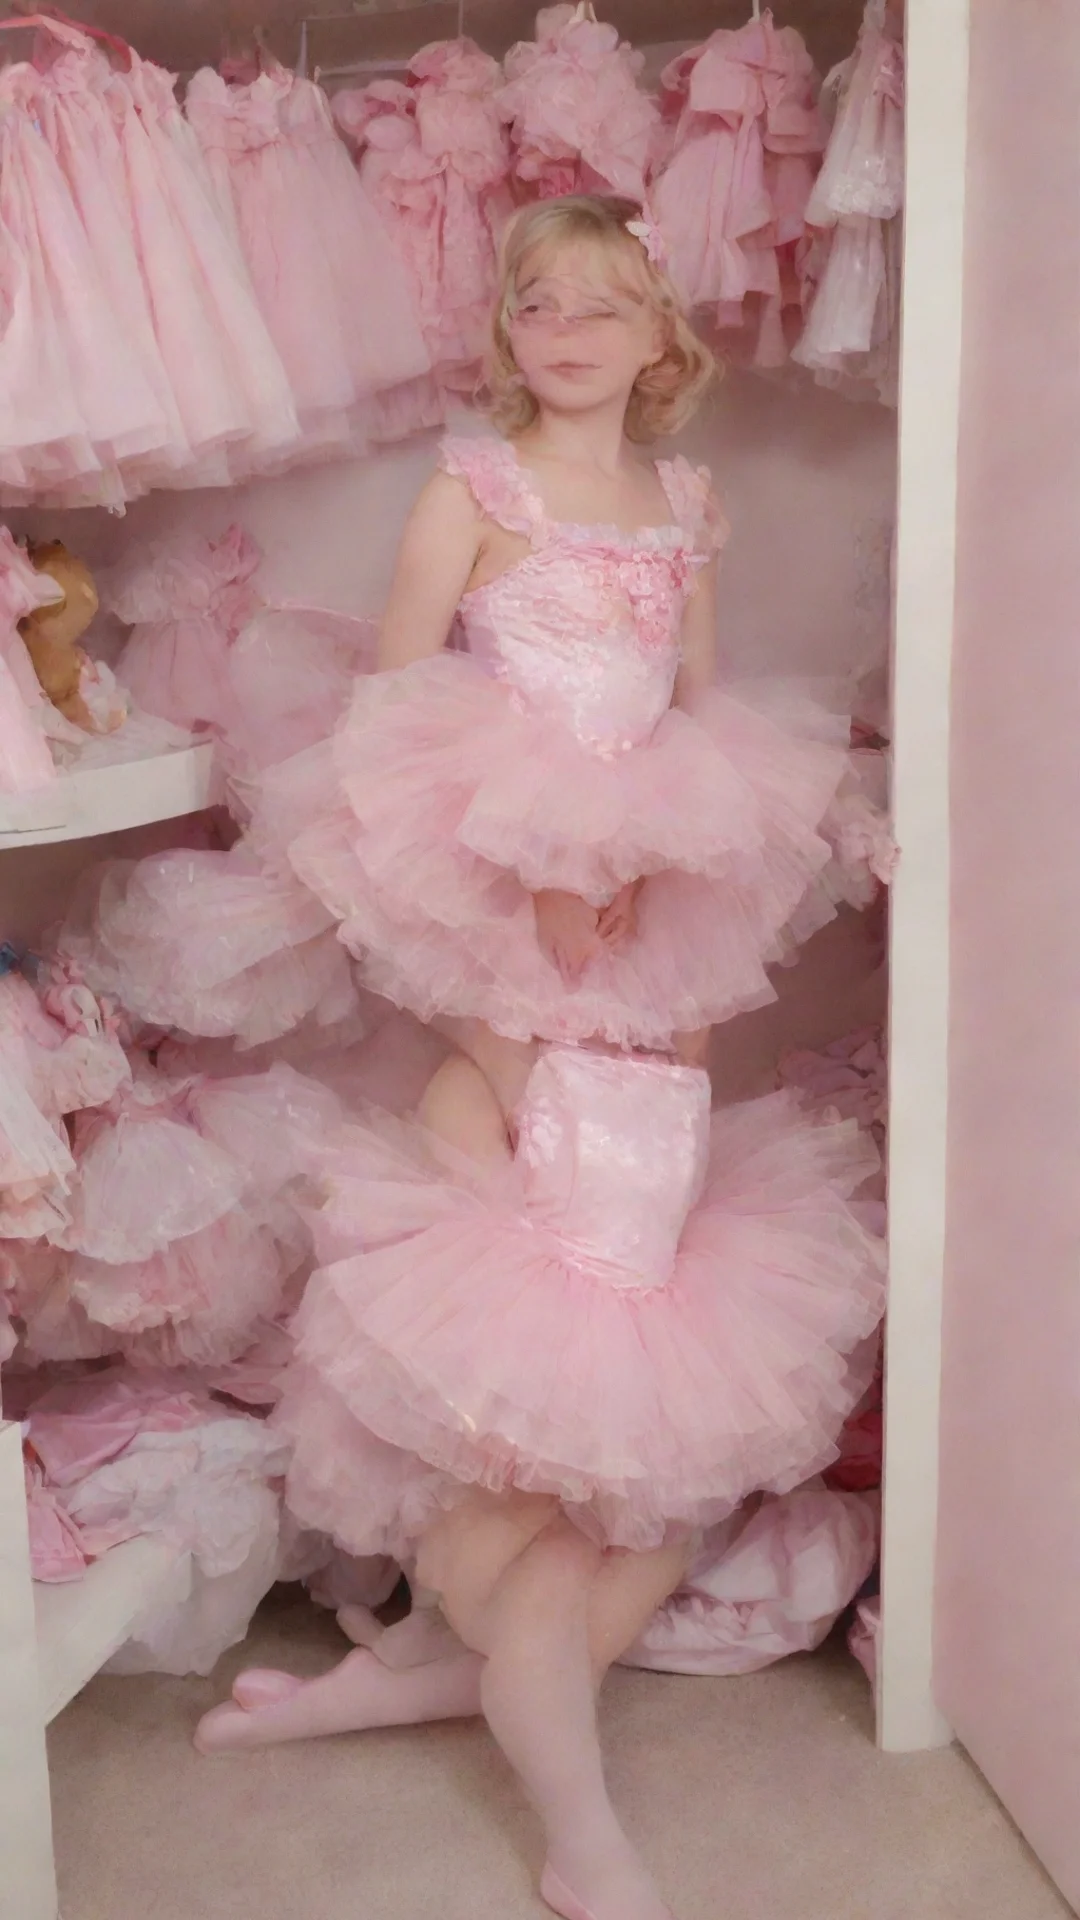 trending abdl sissy in pretty pink sugarpum fairy ballet costume and thick diaper sitting in a closet full of dresses and dolls good looking fantastic 1 tall